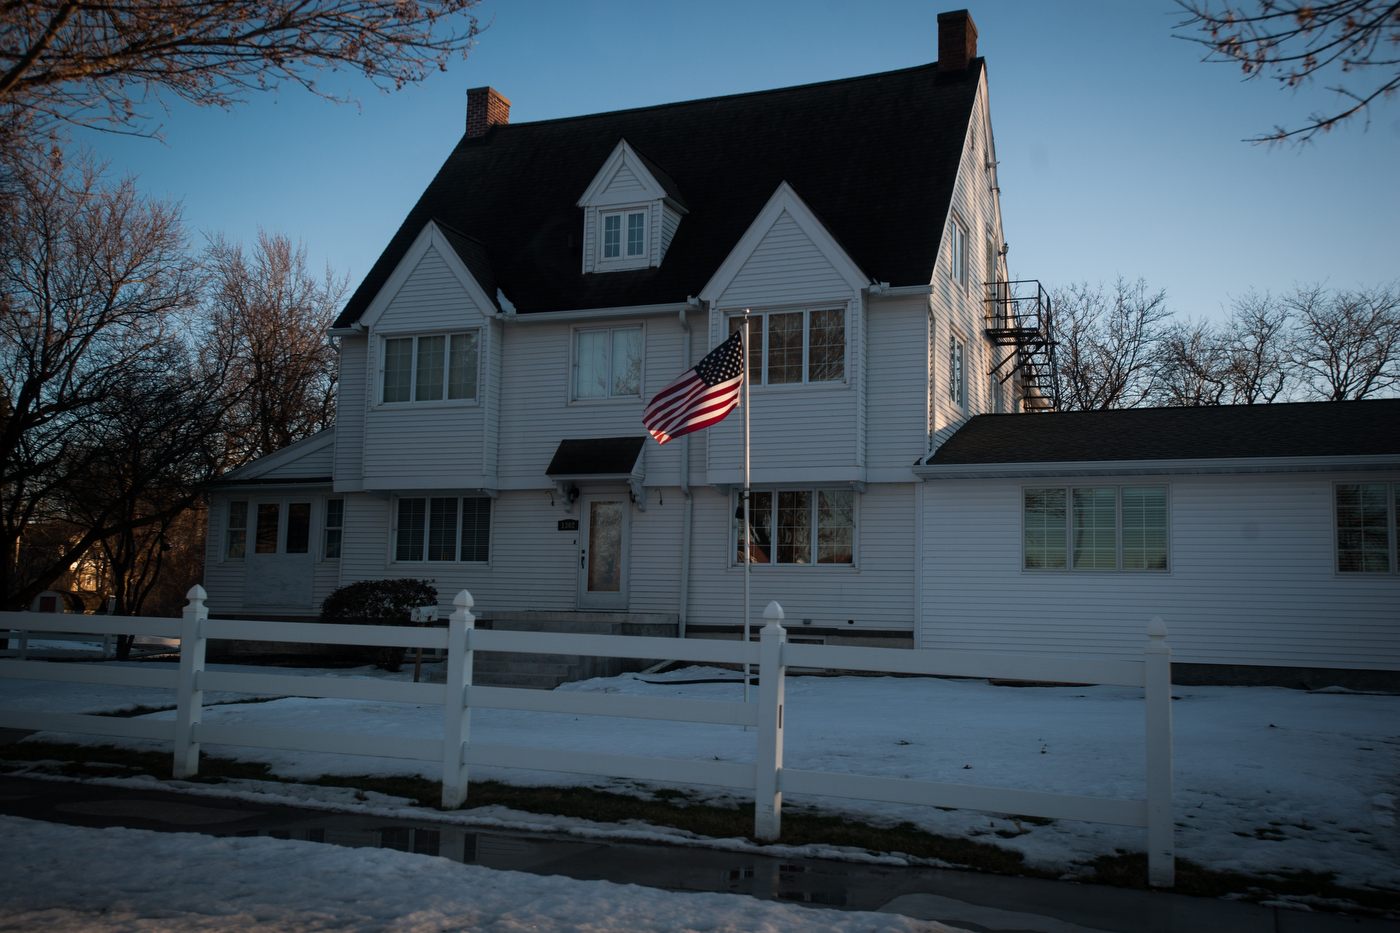  A flag waves in the wind outside a house down the street from where Democratic U.S. presidential candidate Bernie Sanders was scheduled to speak in Marshalltown, Iowa on January 31, 2016. 